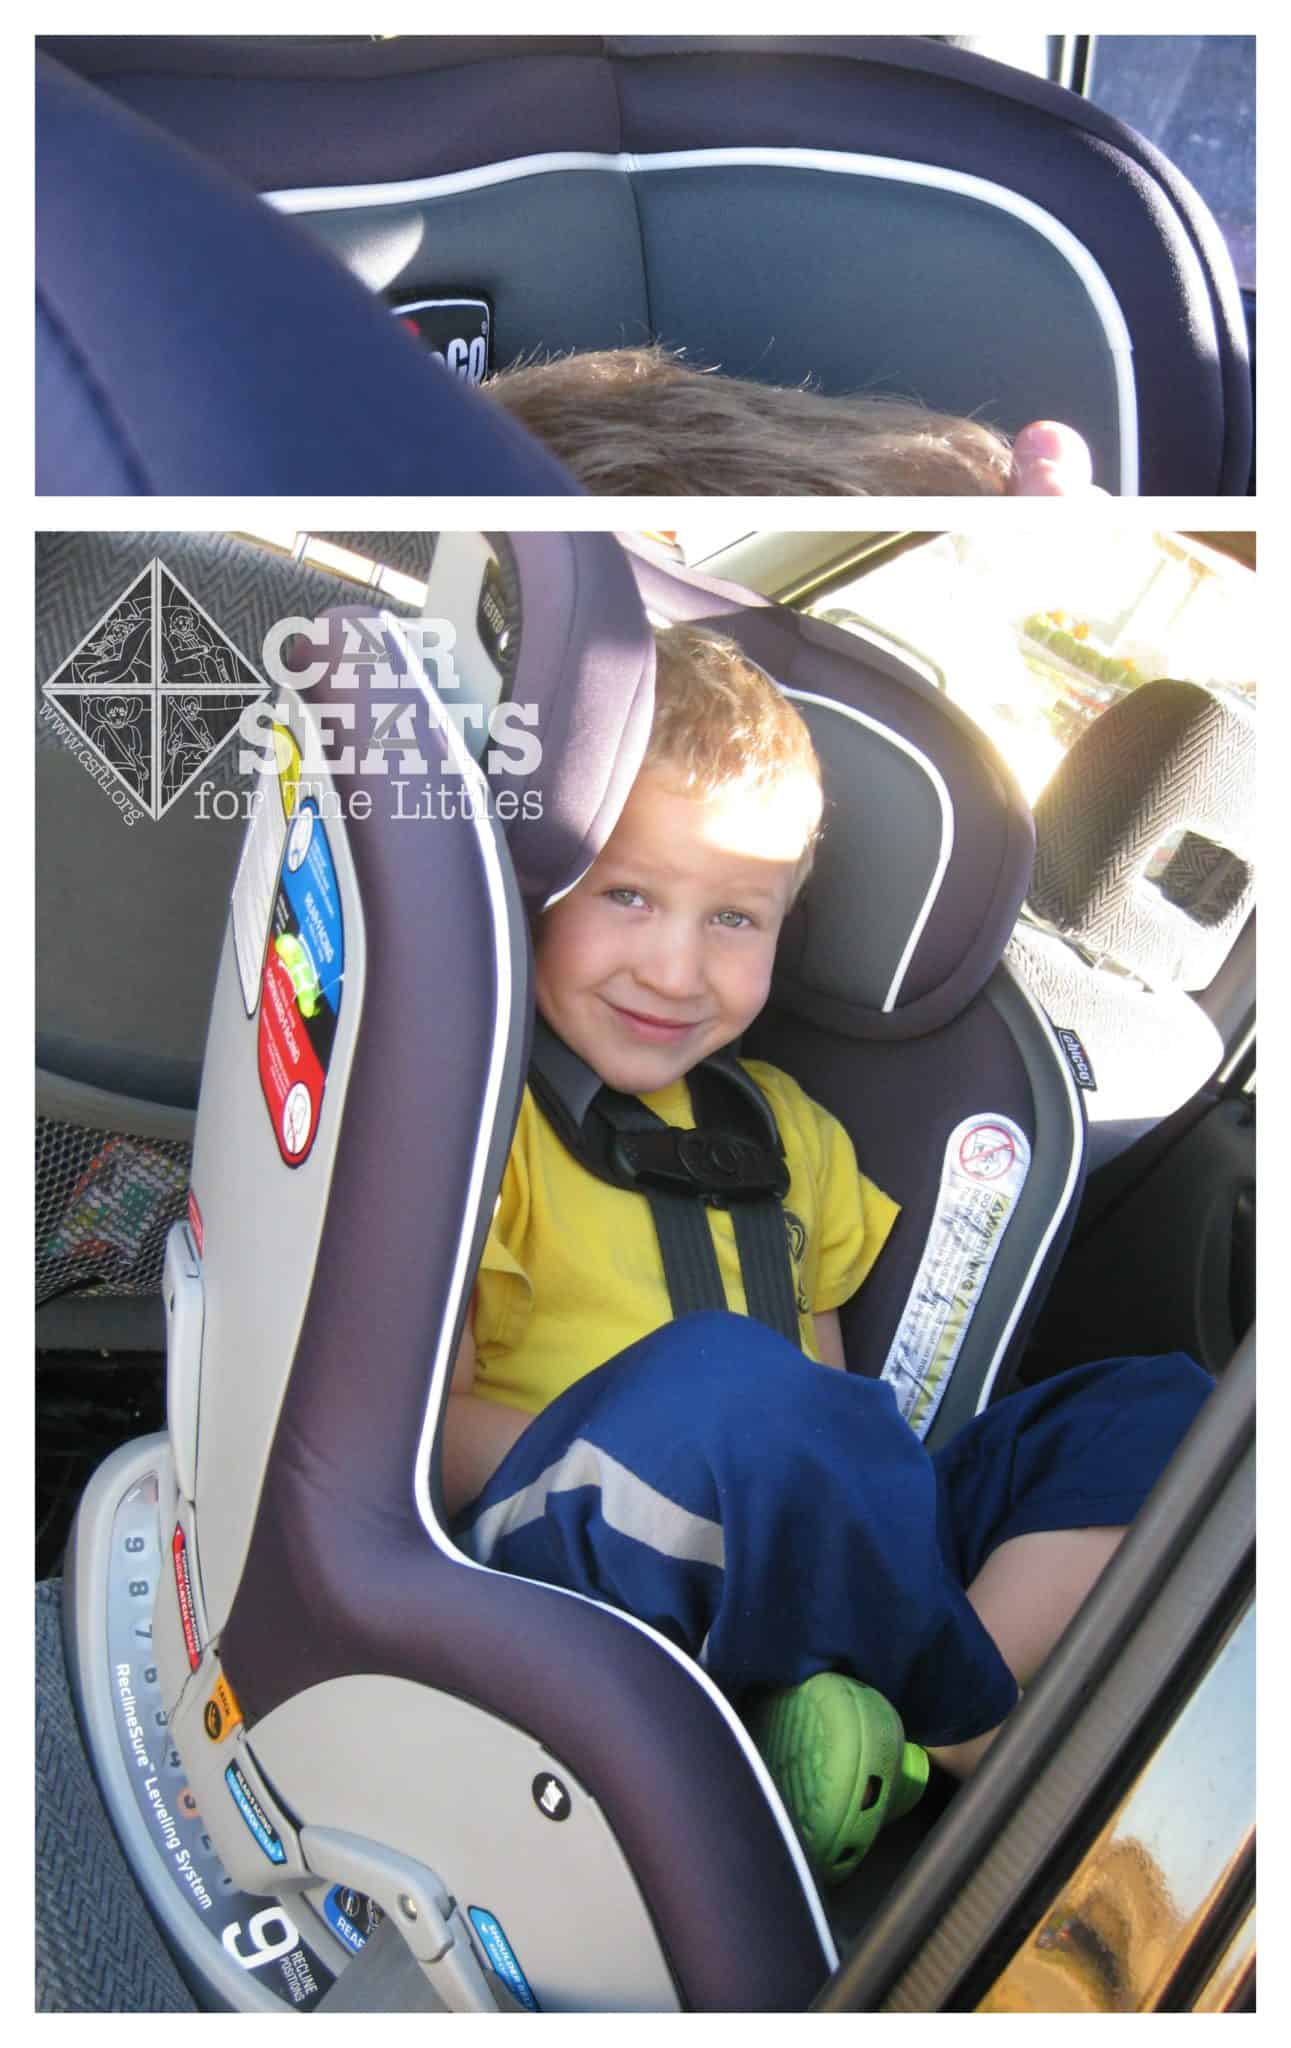 Chicco Nextfit Review Car Seats For The Littles - How To Install Chicco Nextfit Car Seat Forward Facing